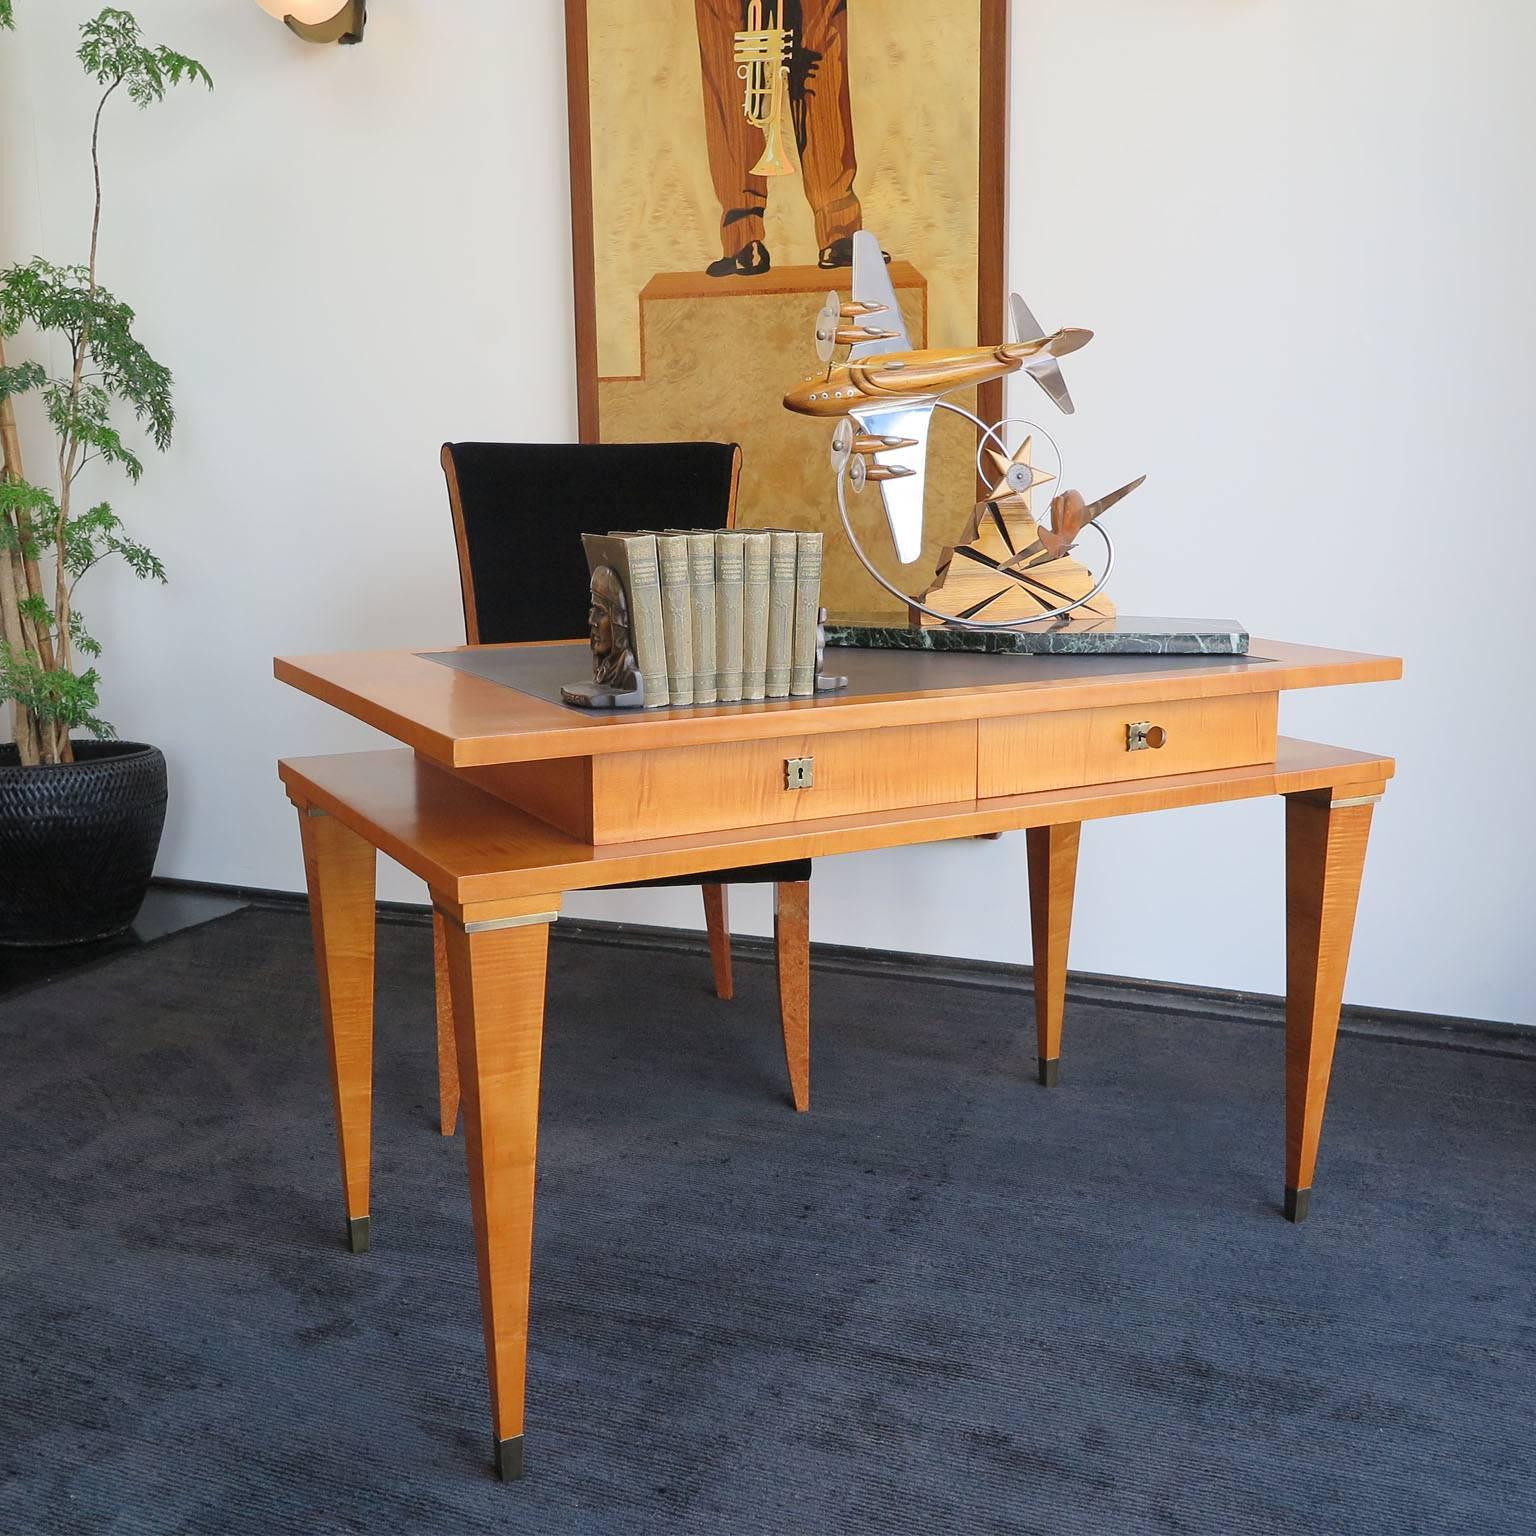 Mid-20th Century Mid-Century Modern Maple and Cherrywood Desk For Sale